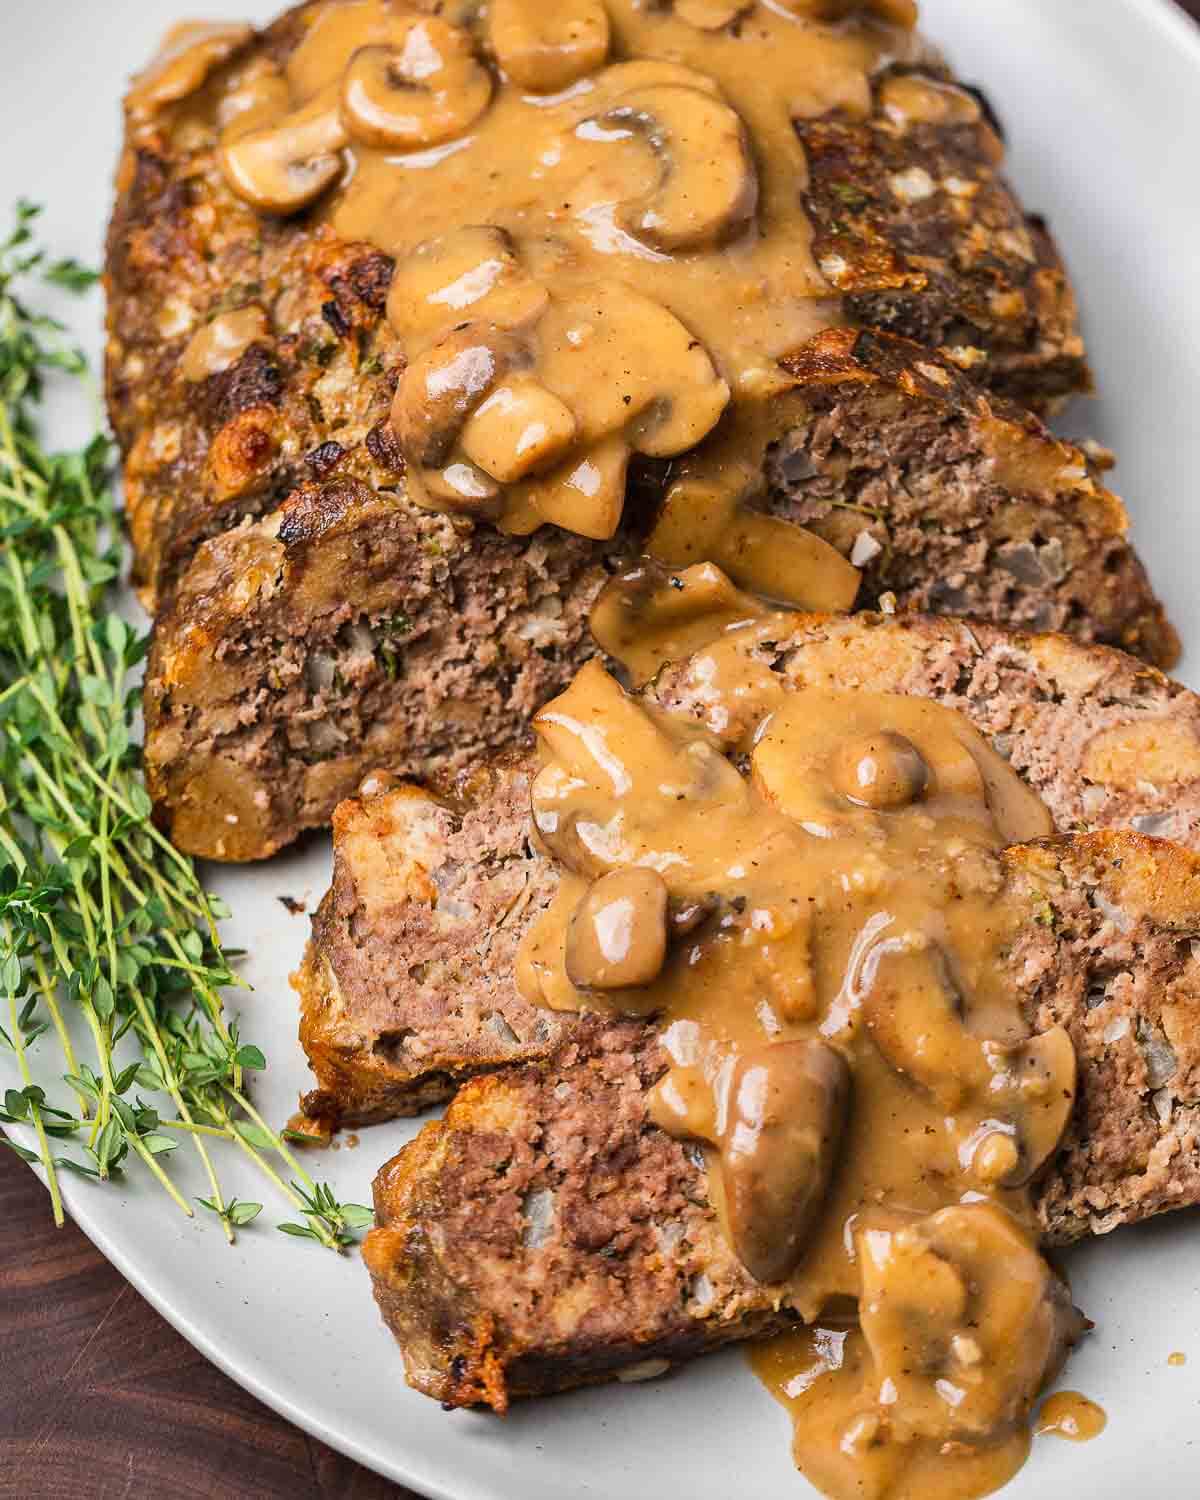 Slices of meatloaf with mushroom brown gravy in white platter.